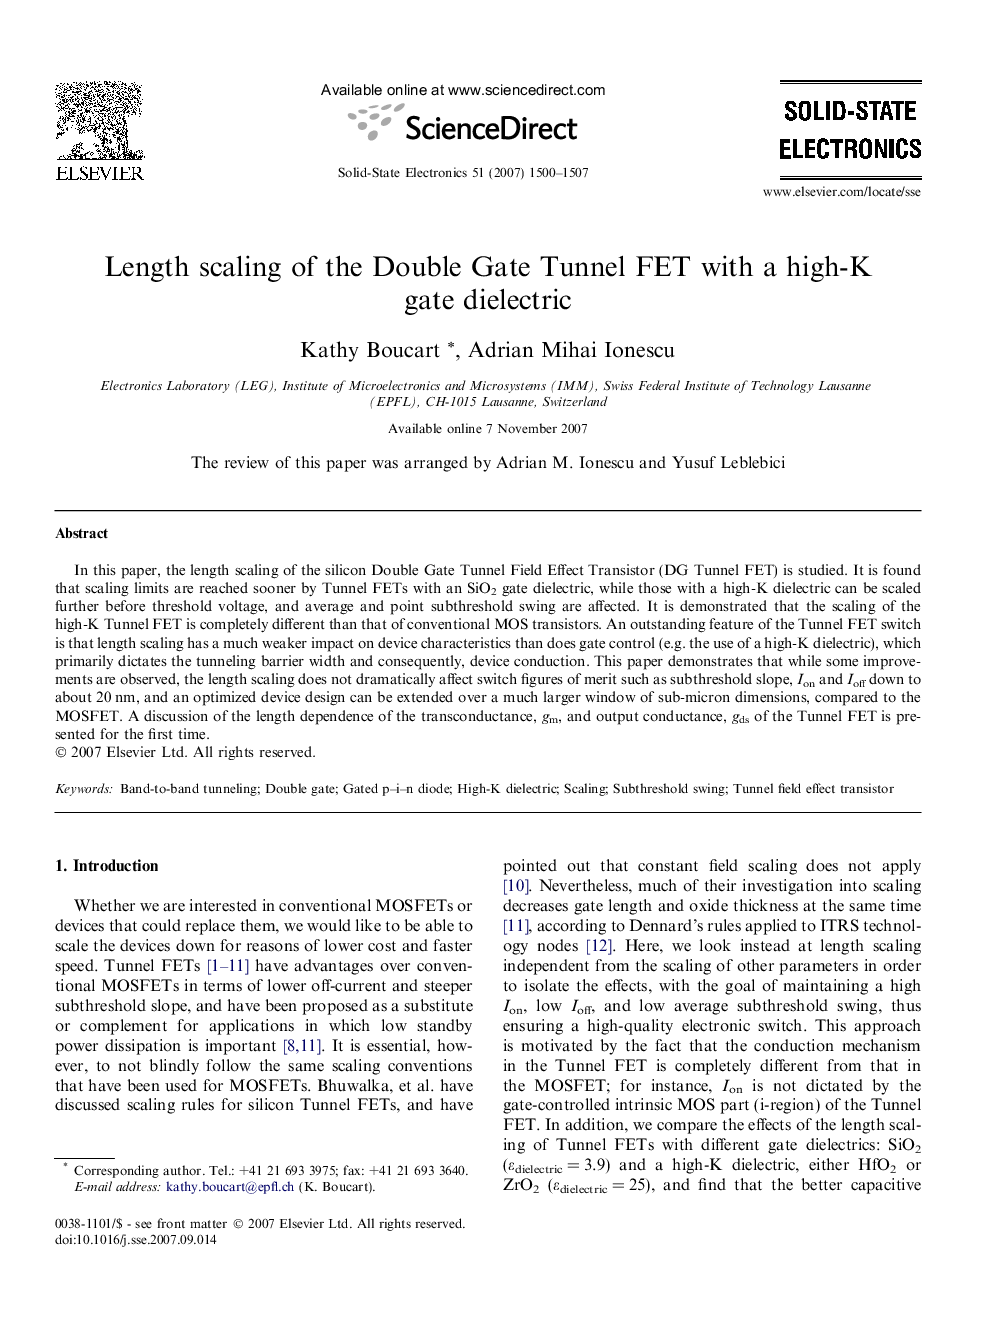 Length scaling of the Double Gate Tunnel FET with a high-K gate dielectric